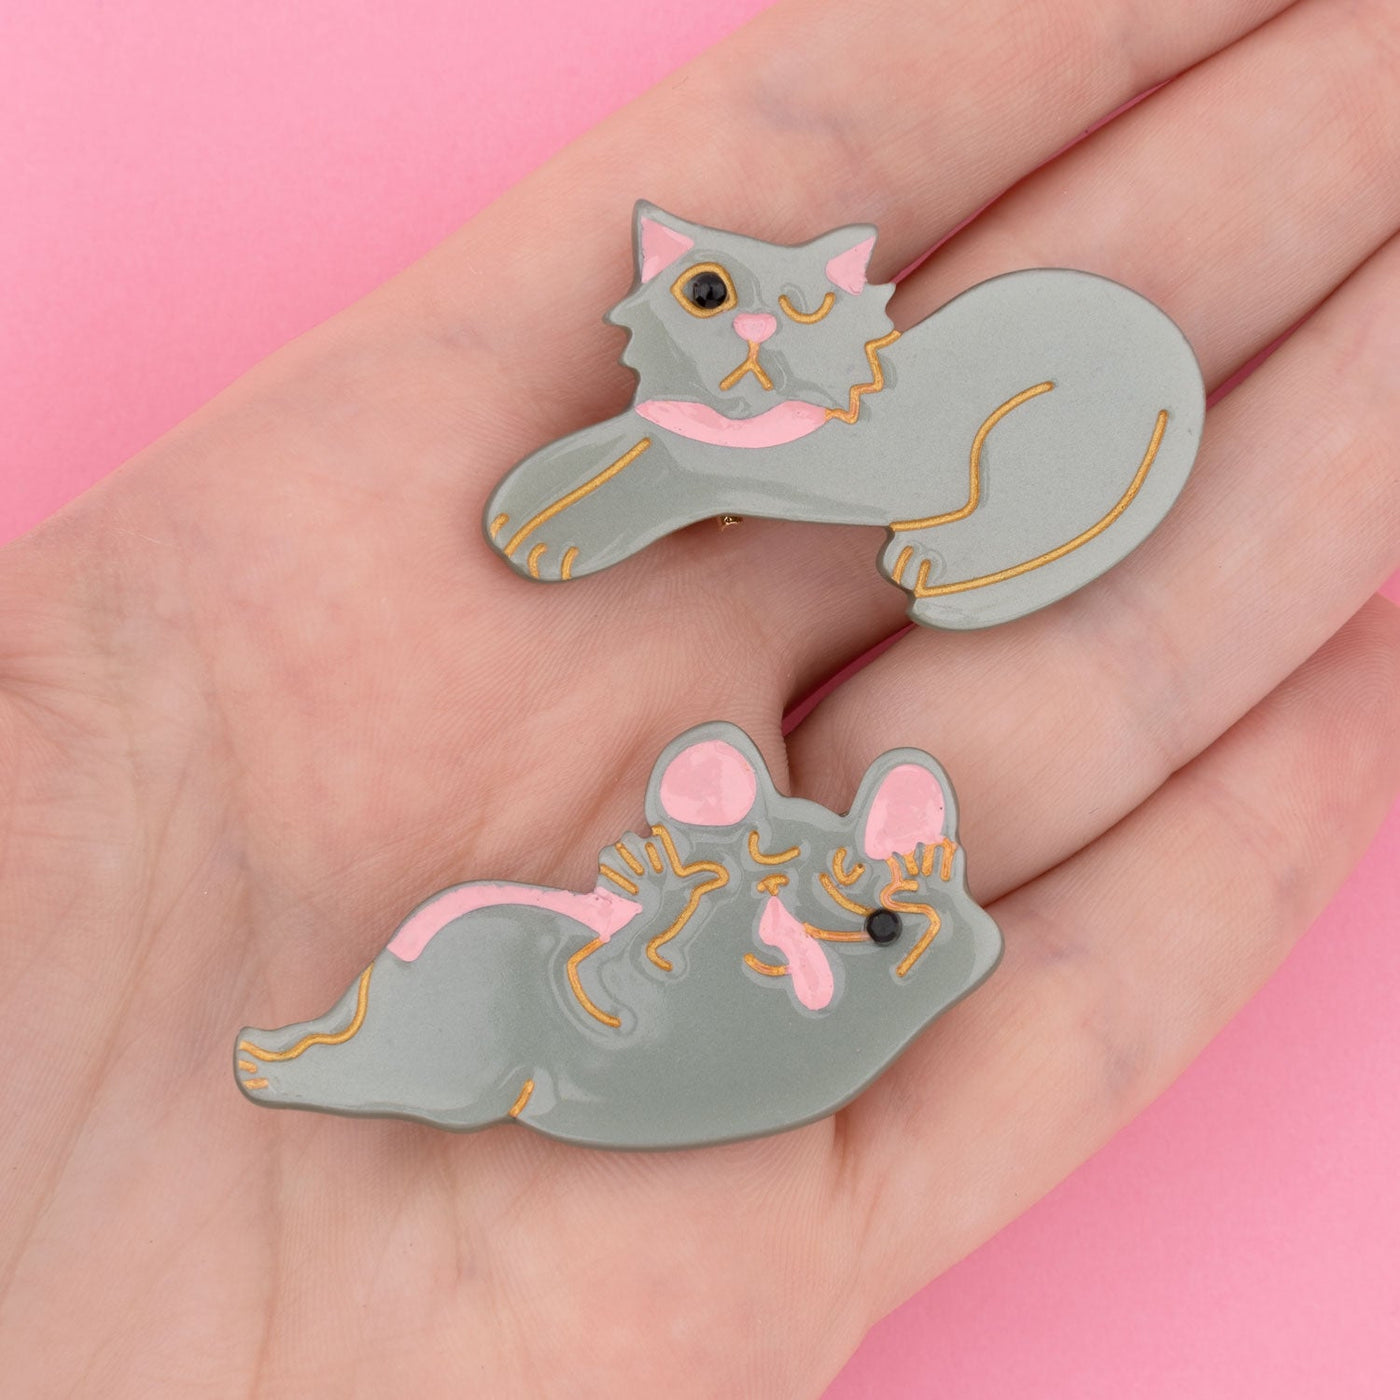 【Coucou Suzette】Mouse & Cat Hair Clips Set ねずみと猫のヘアクリップセット  | Coucoubebe/ククベベ